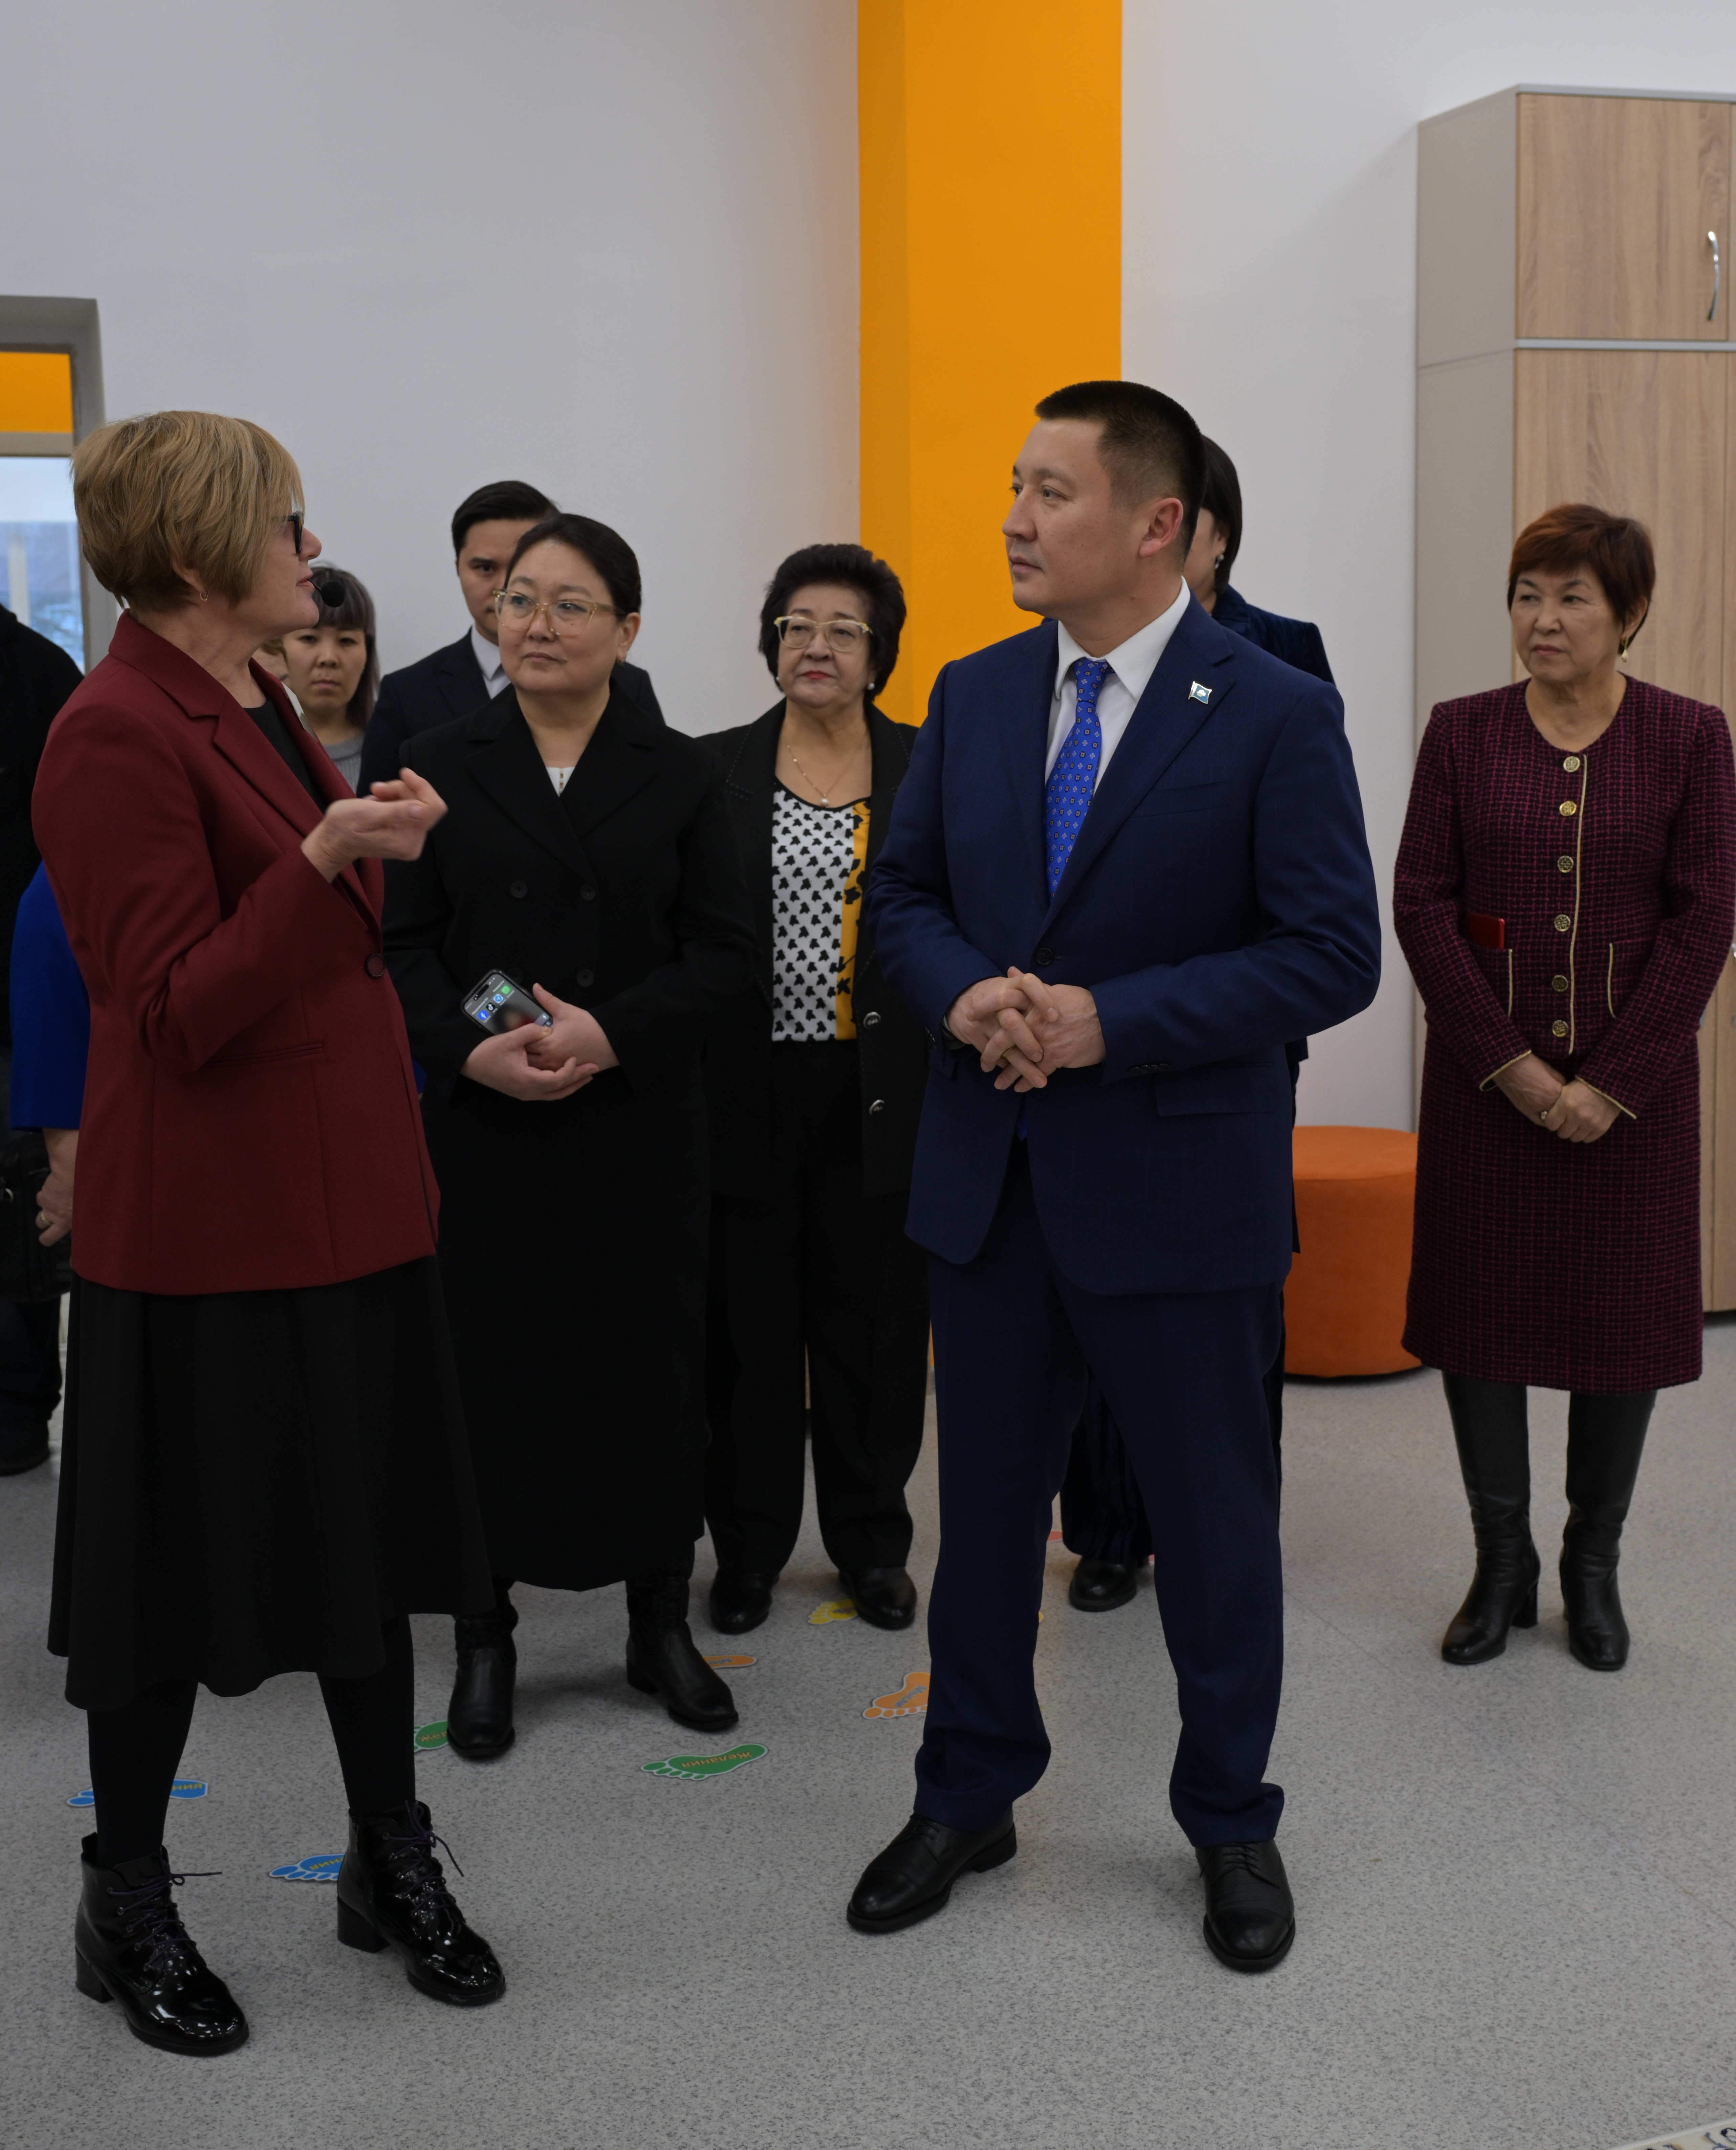 A new extension to Secondary School No. 9 named Shapyka Shokina was opened in Pavlodar